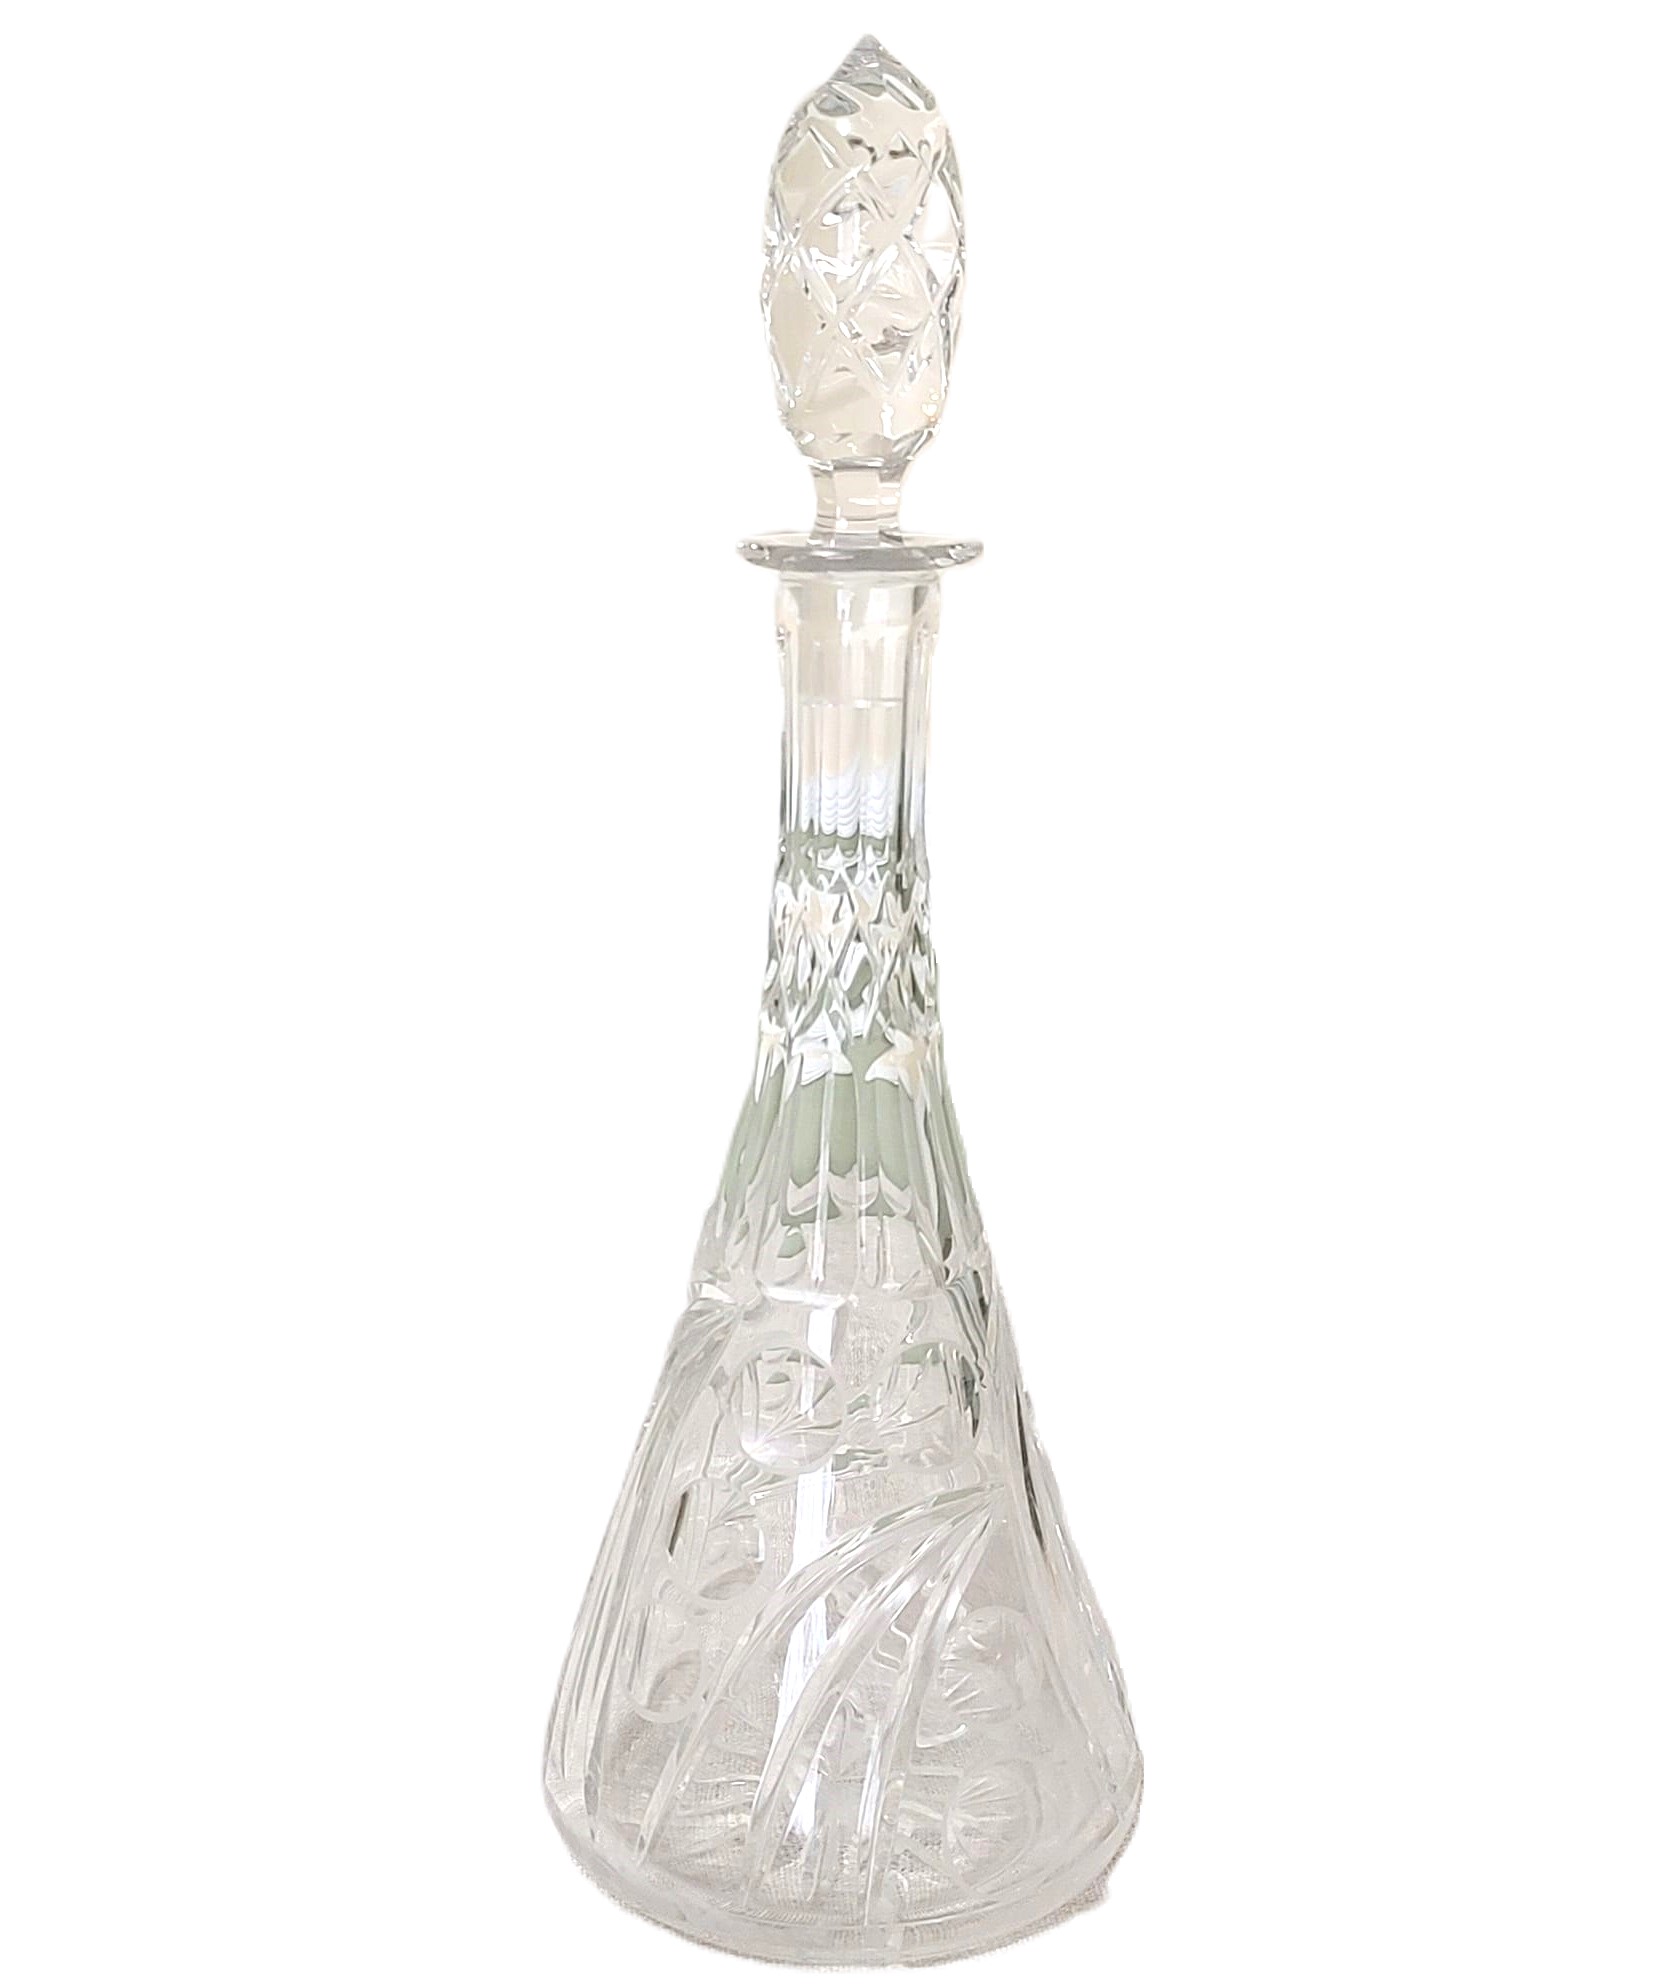 Lead Crystal Etched Cut Liquor Decanter Large 15" tall